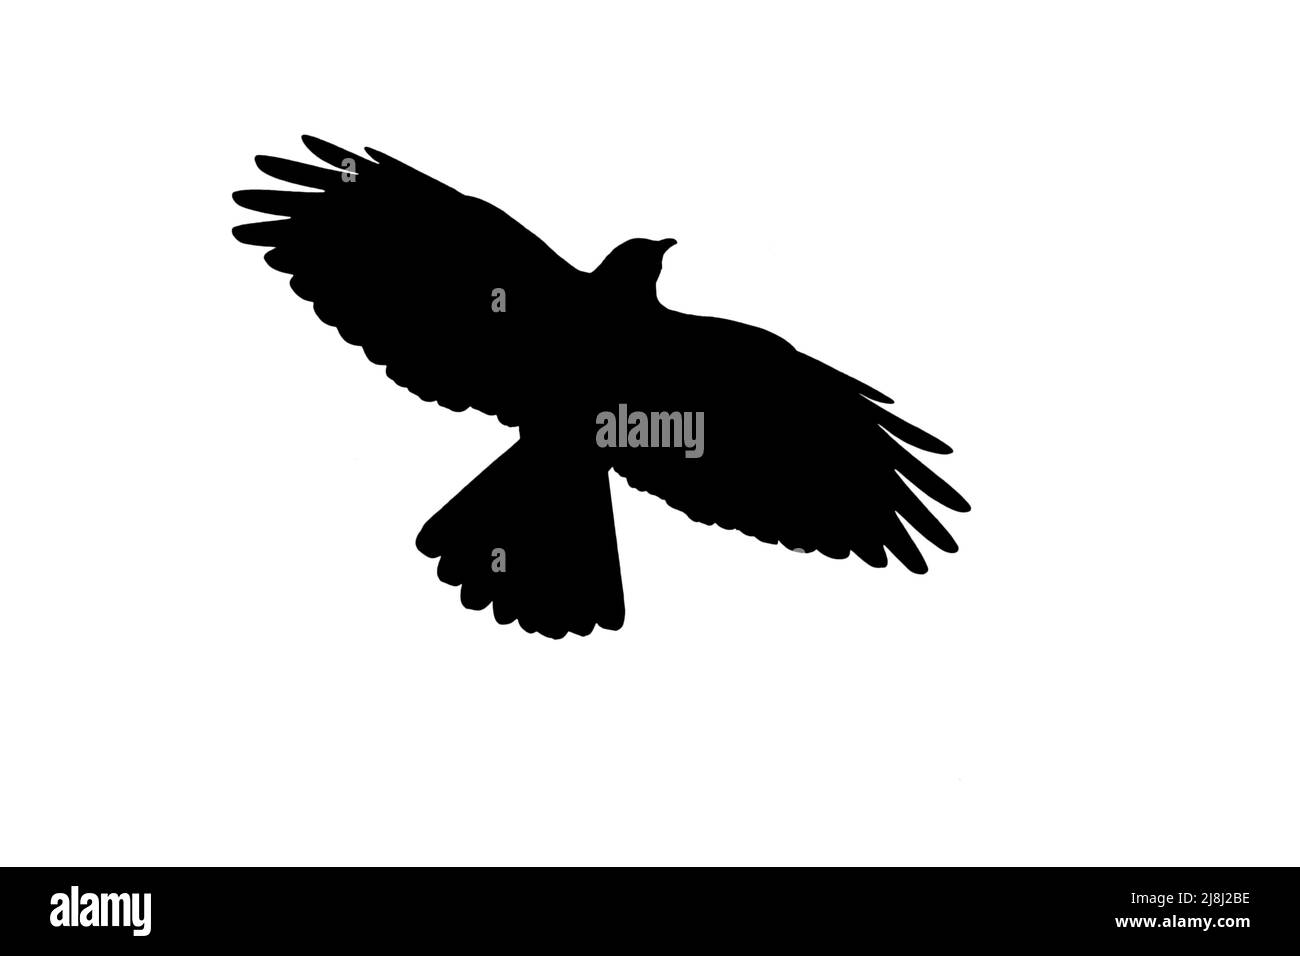 Silhouette of Alpine chough (Pyrrhocorax graculus) in flight outlined against white background to show wings, head and tail shapes Stock Photo